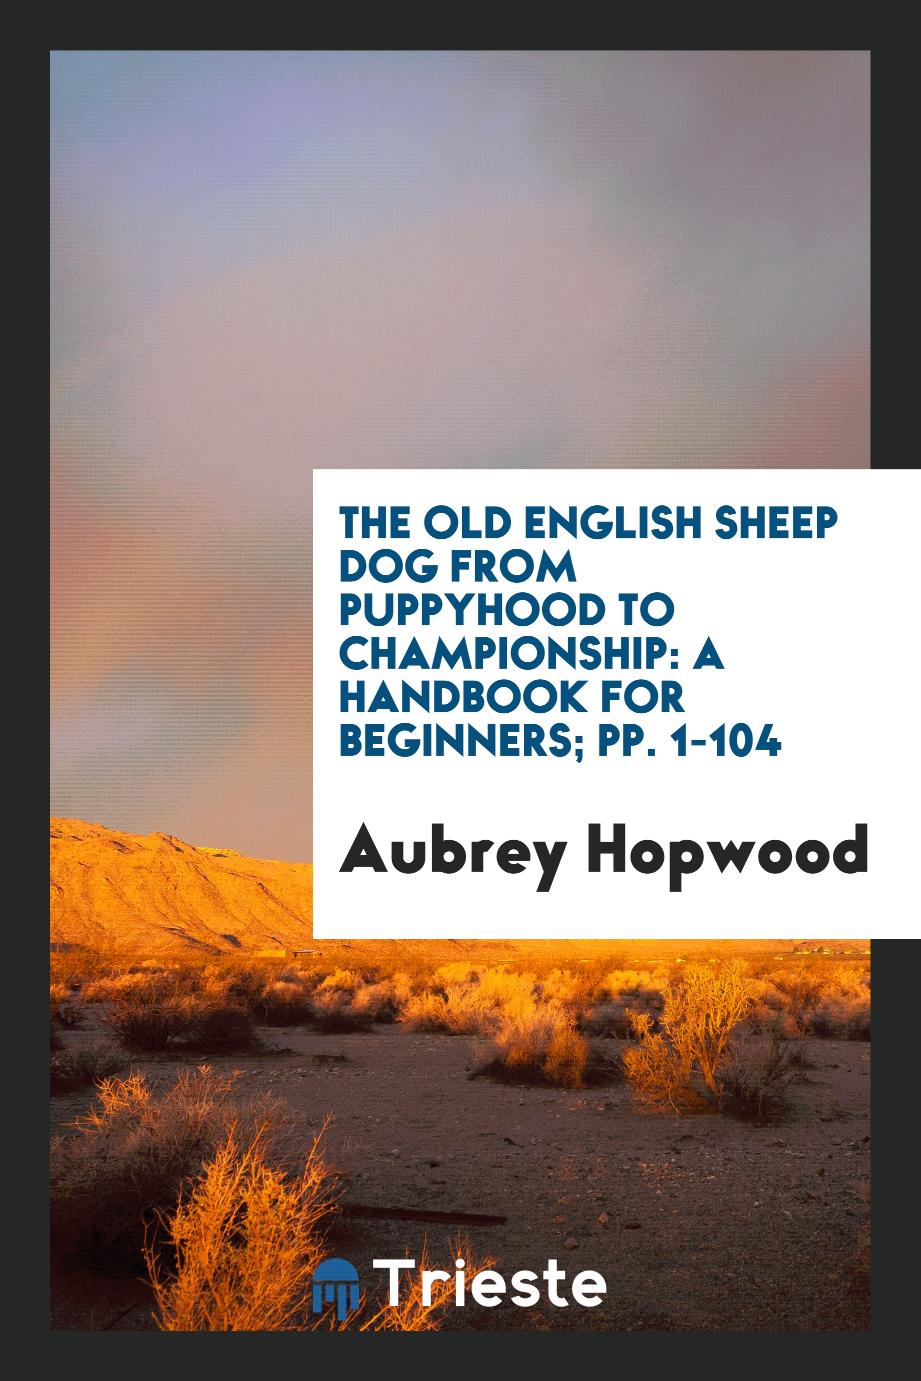 The Old English Sheep Dog from Puppyhood to Championship: A Handbook for Beginners; pp. 1-104